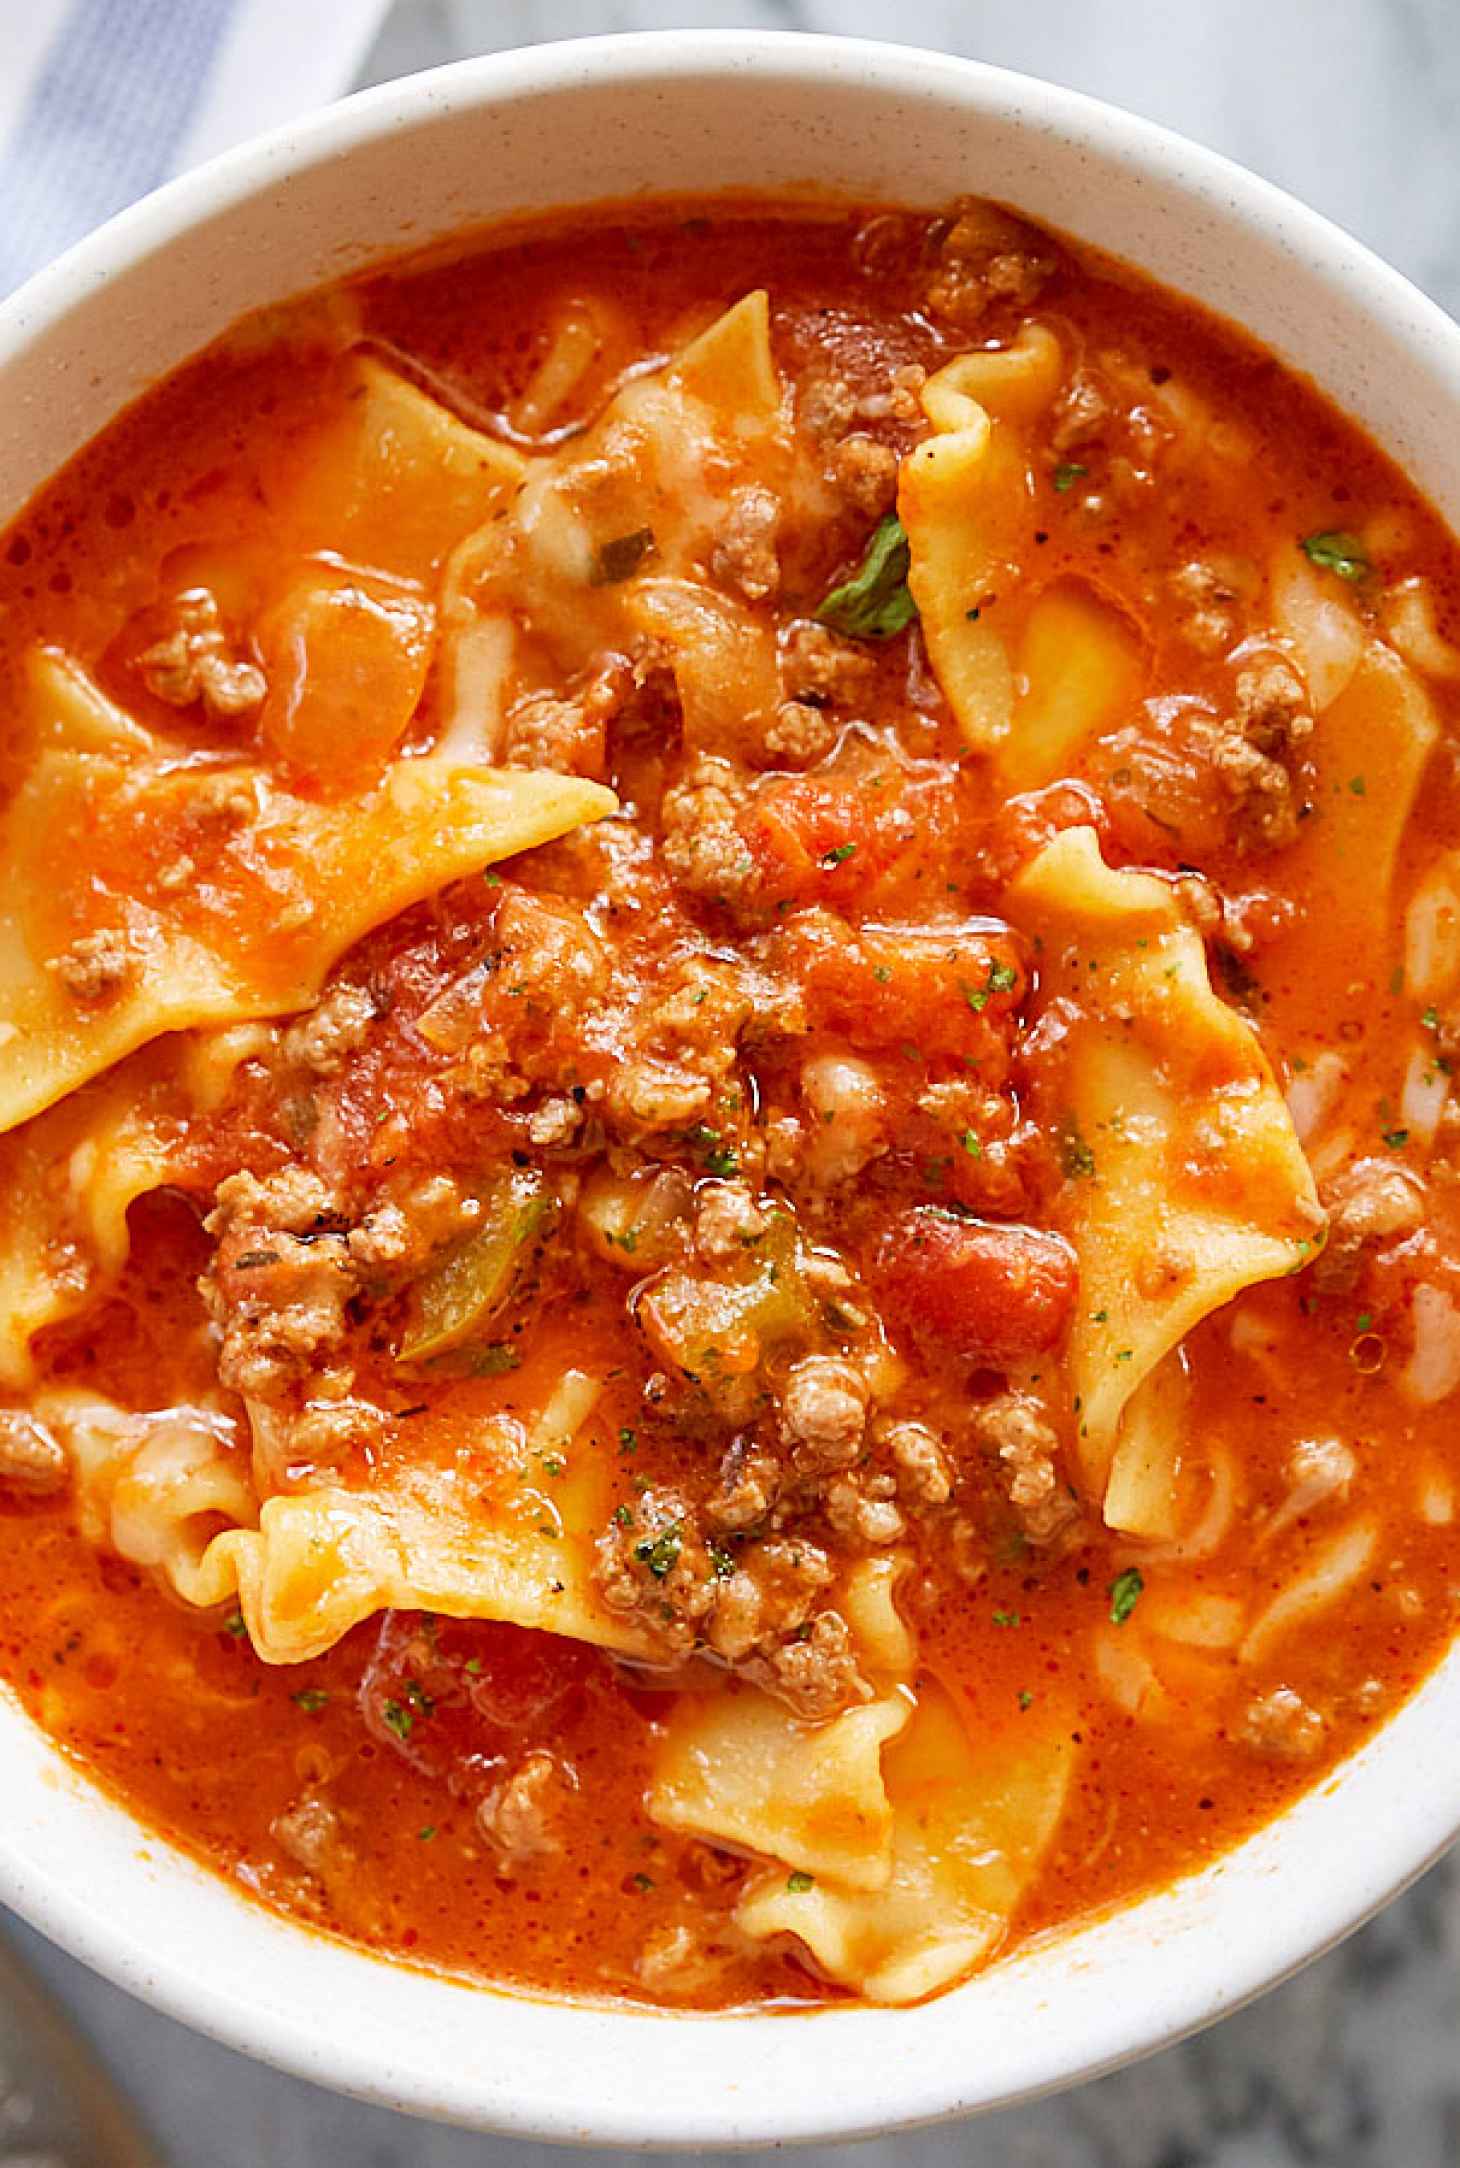 Quick Soup Recipes: 9 Busy Day Soups That Requires Little to No Effort ...